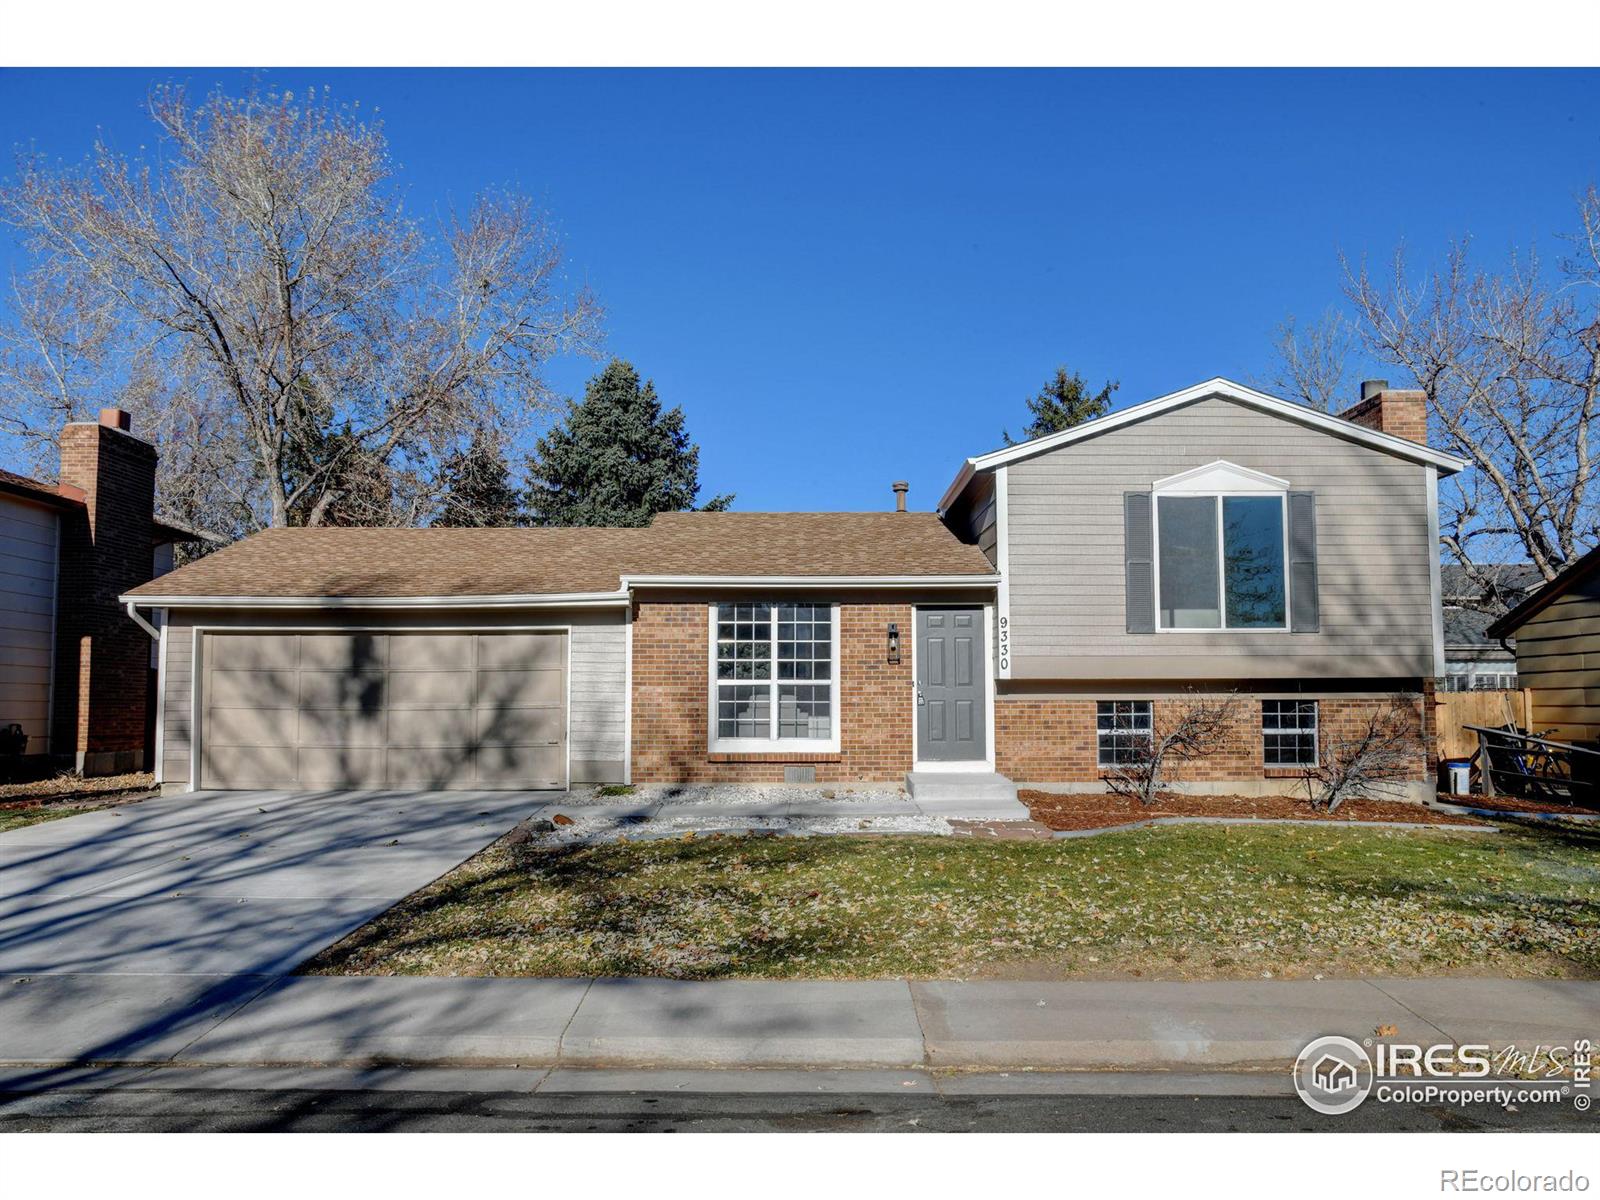 9330  carr street, Westminster sold home. Closed on 2024-01-11 for $511,000.